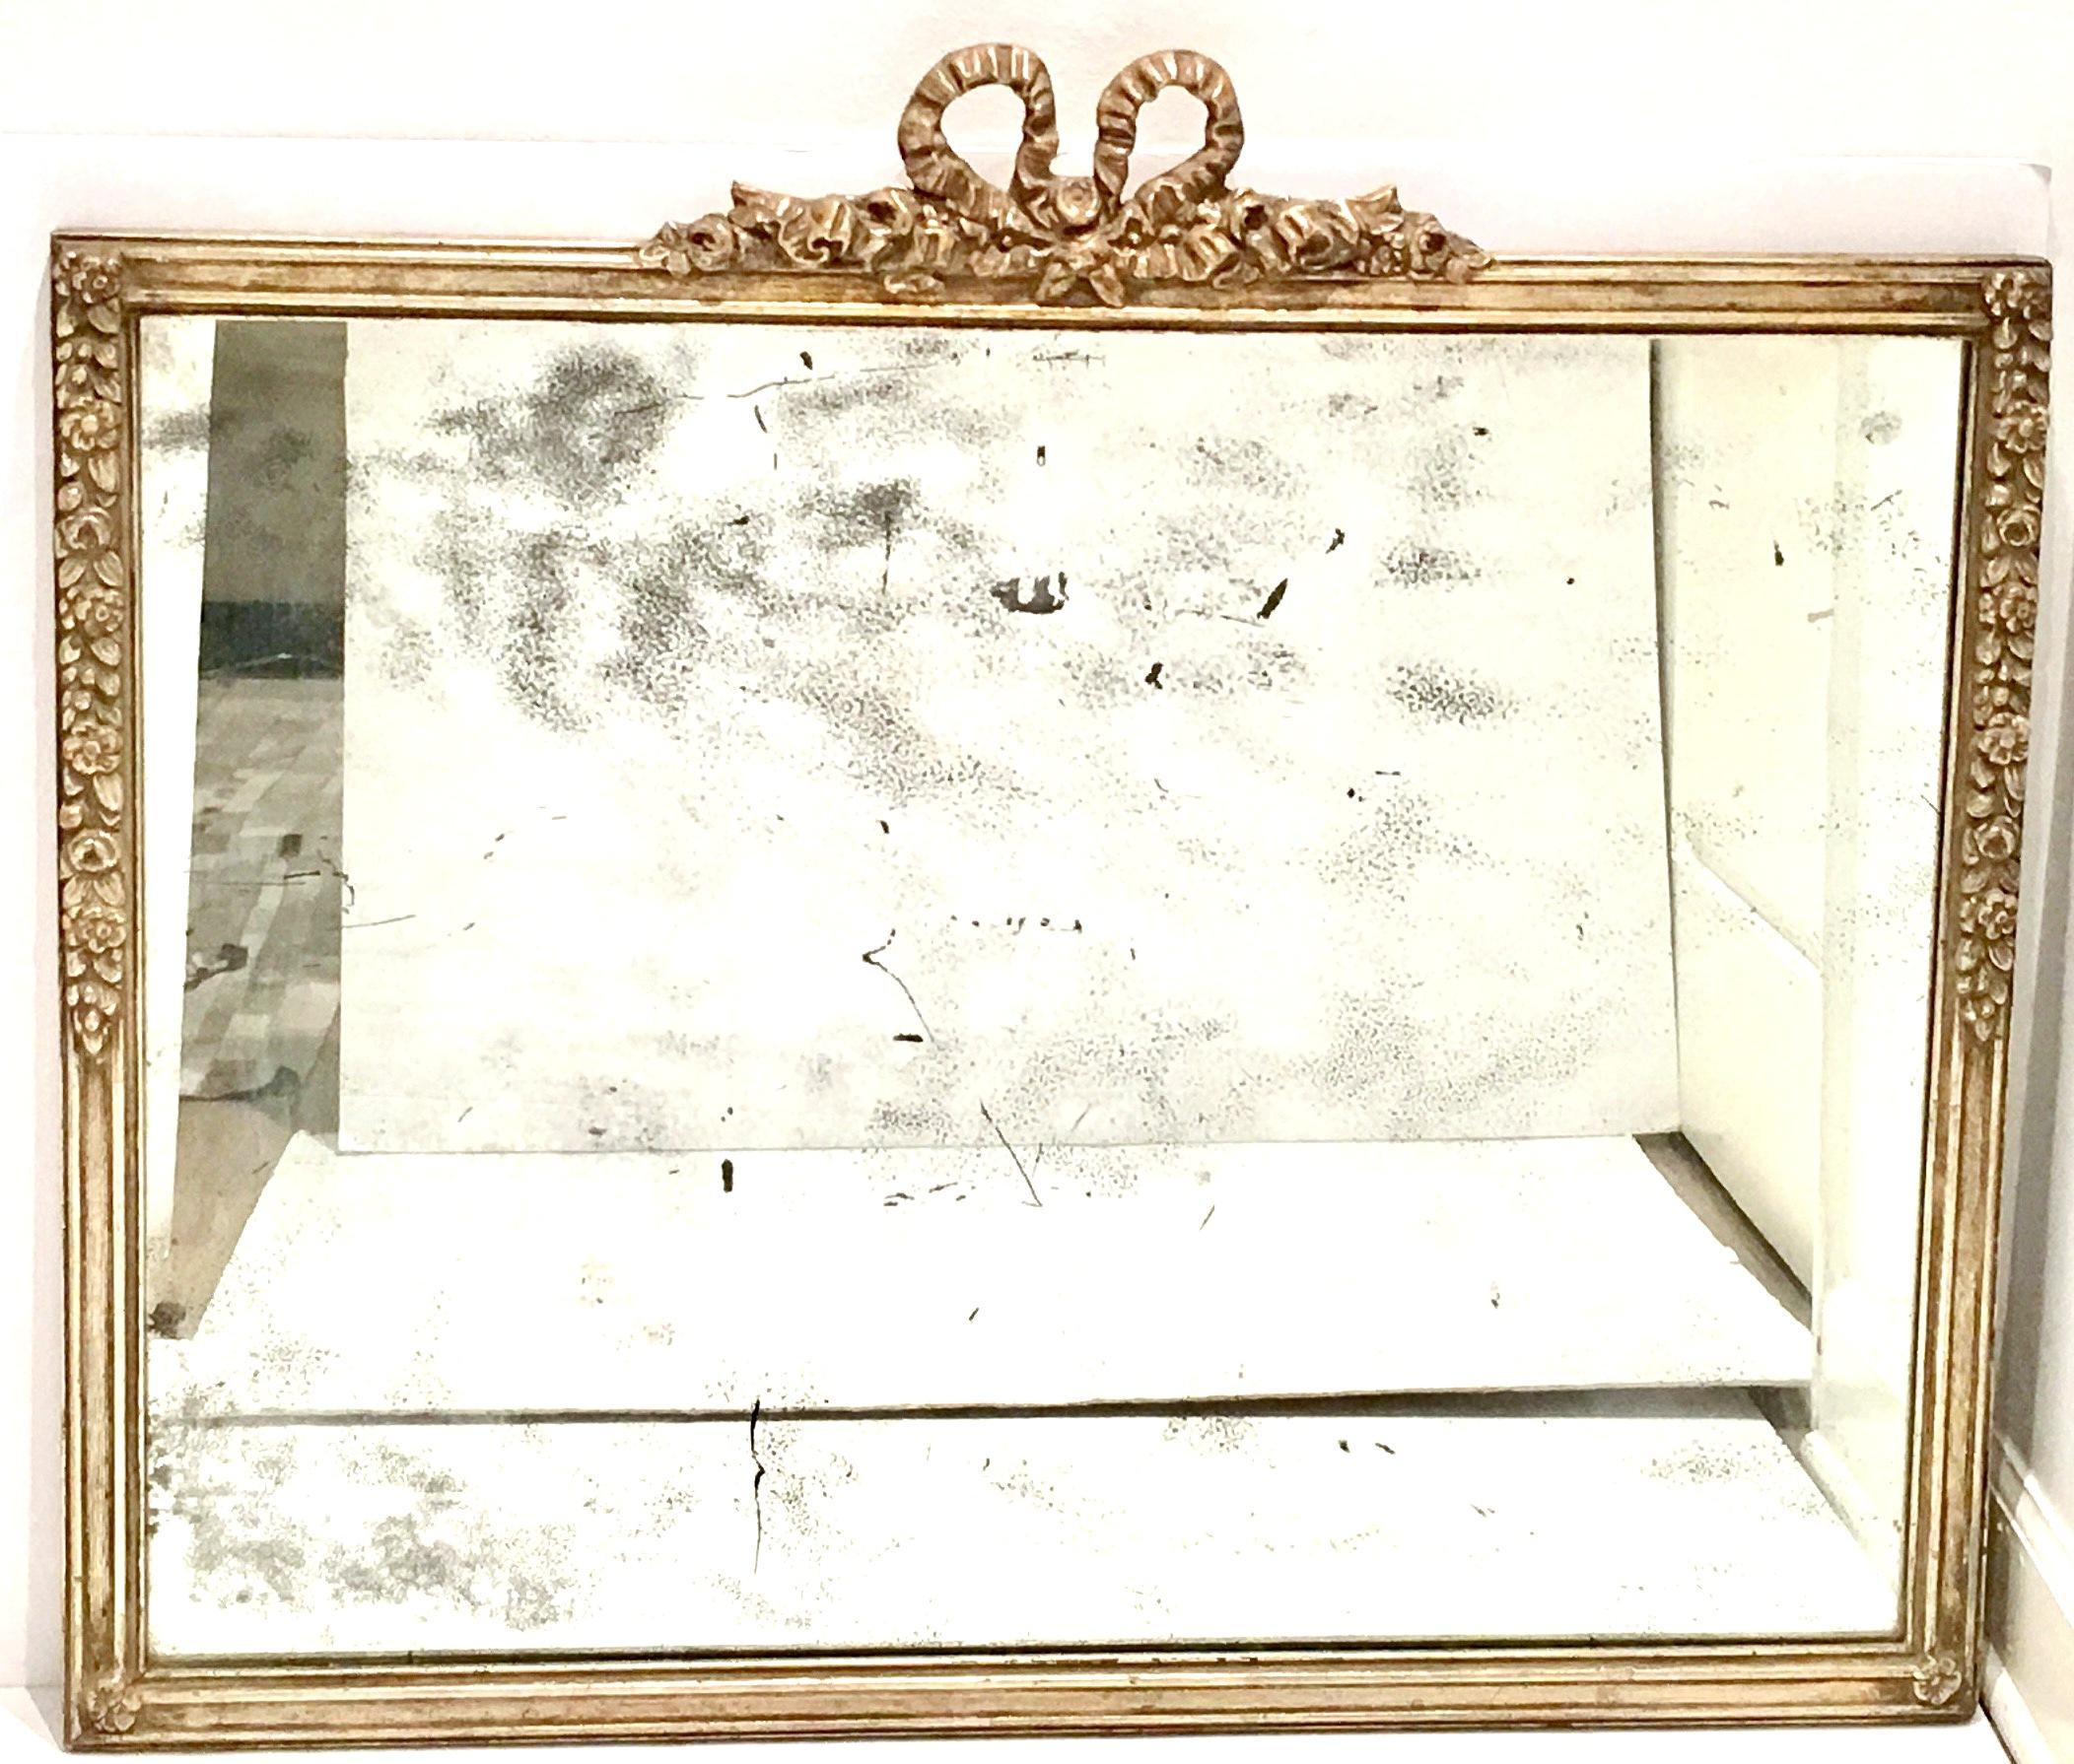 19th Century Antique Louis XVI style silver leaf carved wood mirror. Original heavy mirror with coveted antique wear and patina. Hand Carved high relief wood with authentic silver leaf finish, floral motif with a central crown ornament in the French